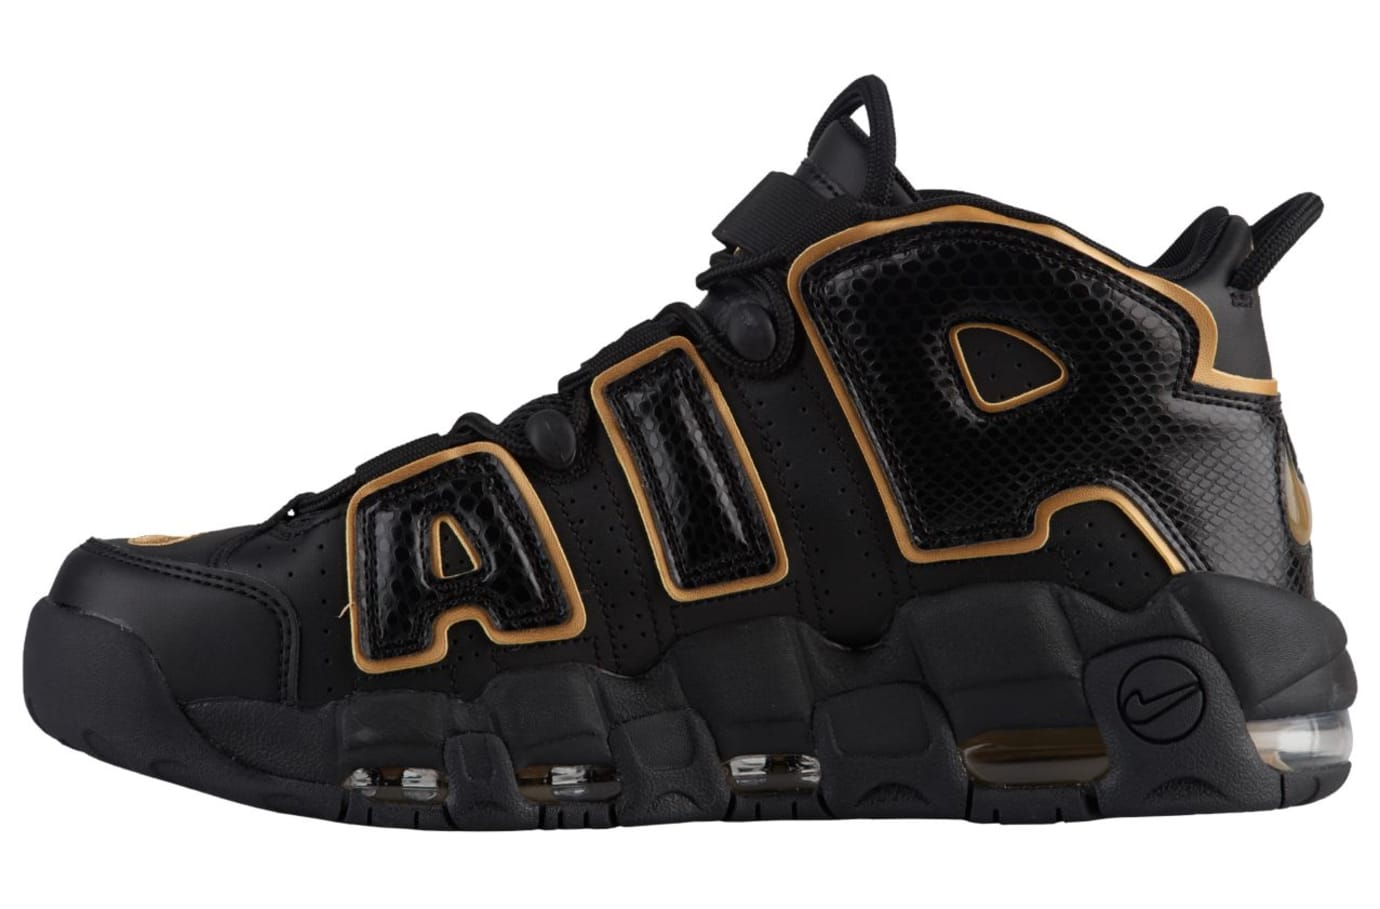 Nike Air More Uptempo Black/Metallic Gold 'France' AV3810-001 Release Date  | Sole Collector